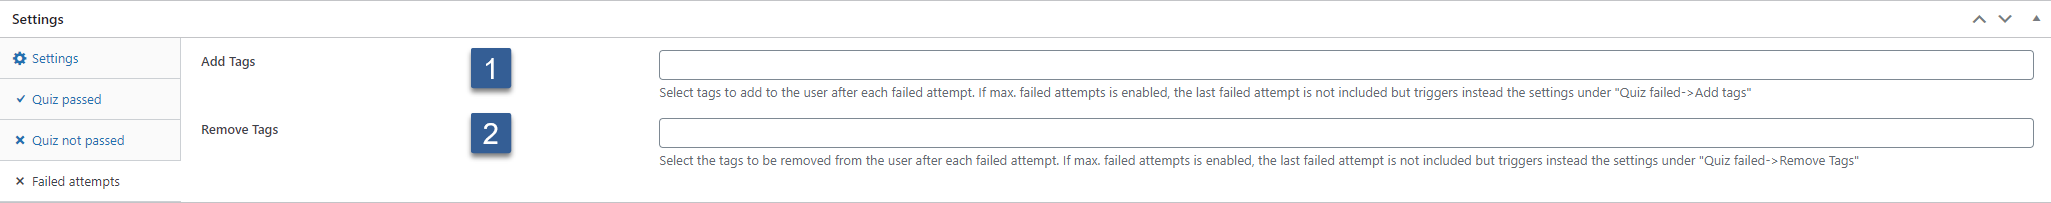 How to create a quiz - Failed attempts